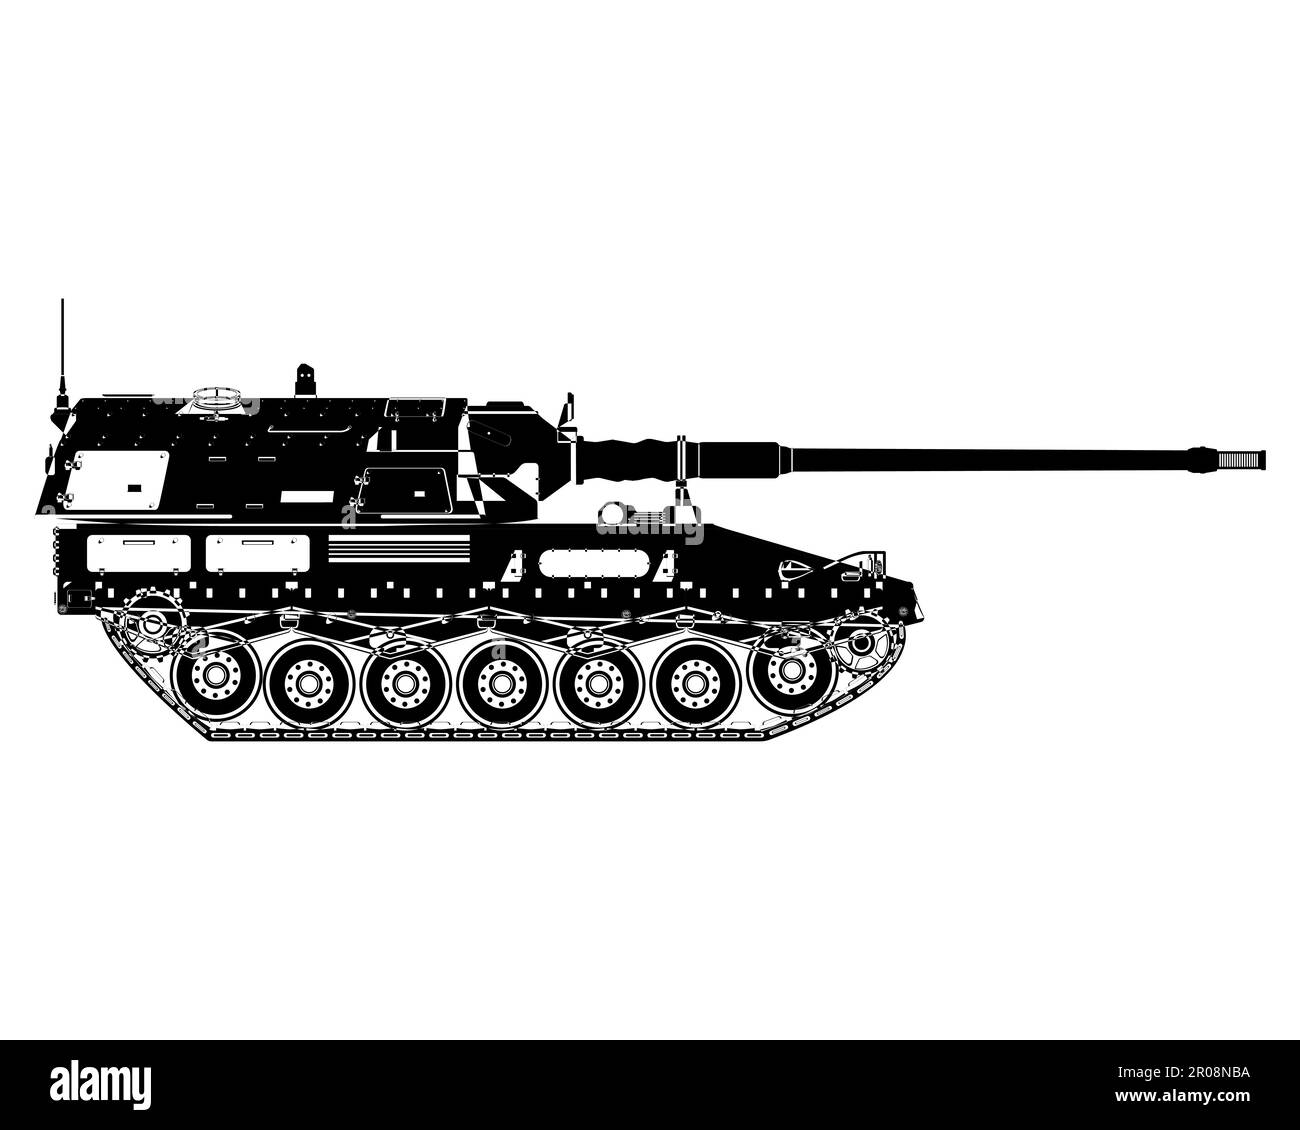 Self-propelled howitzer outline. German 155 mm Panzerhaubitze 2000. Military armored vehicle. Vector illustration isolated on white background. Stock Vector